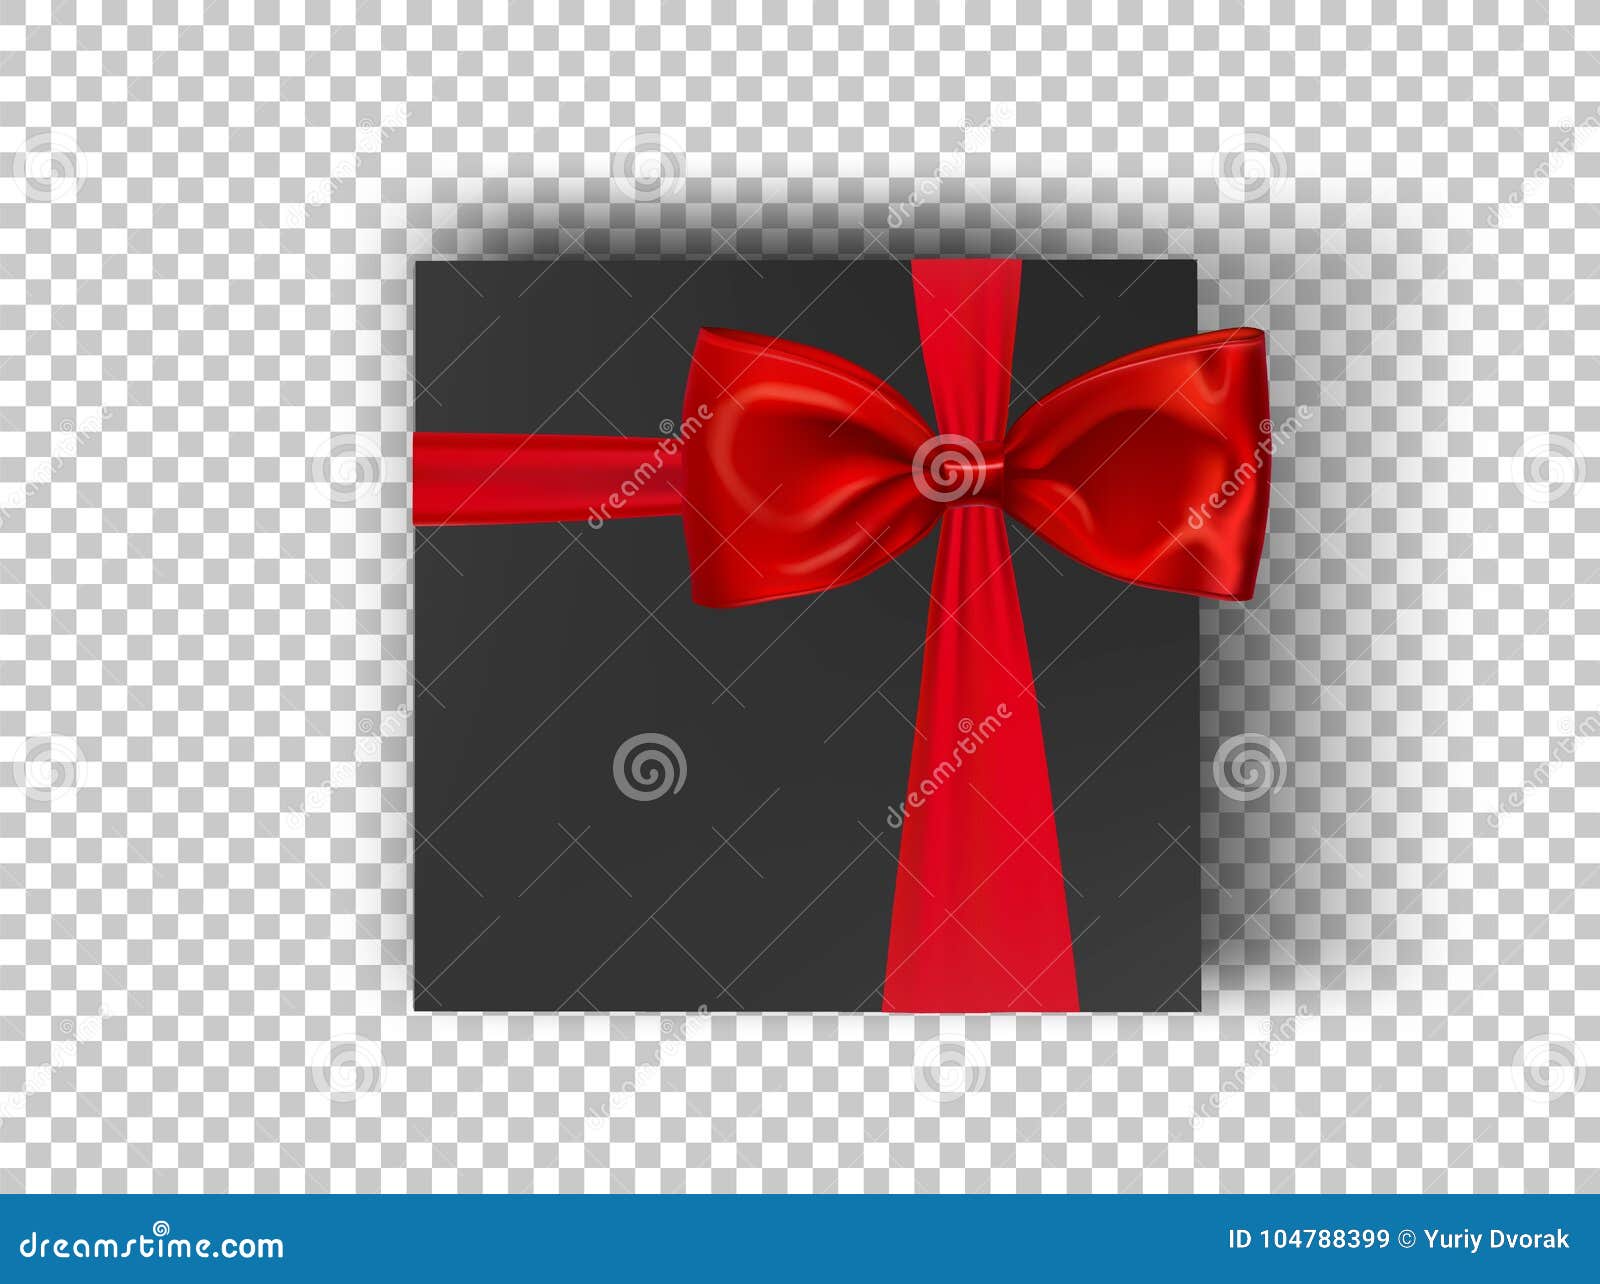 Download Black Square Cardboard Box With Red Ribbon And Bow On ...